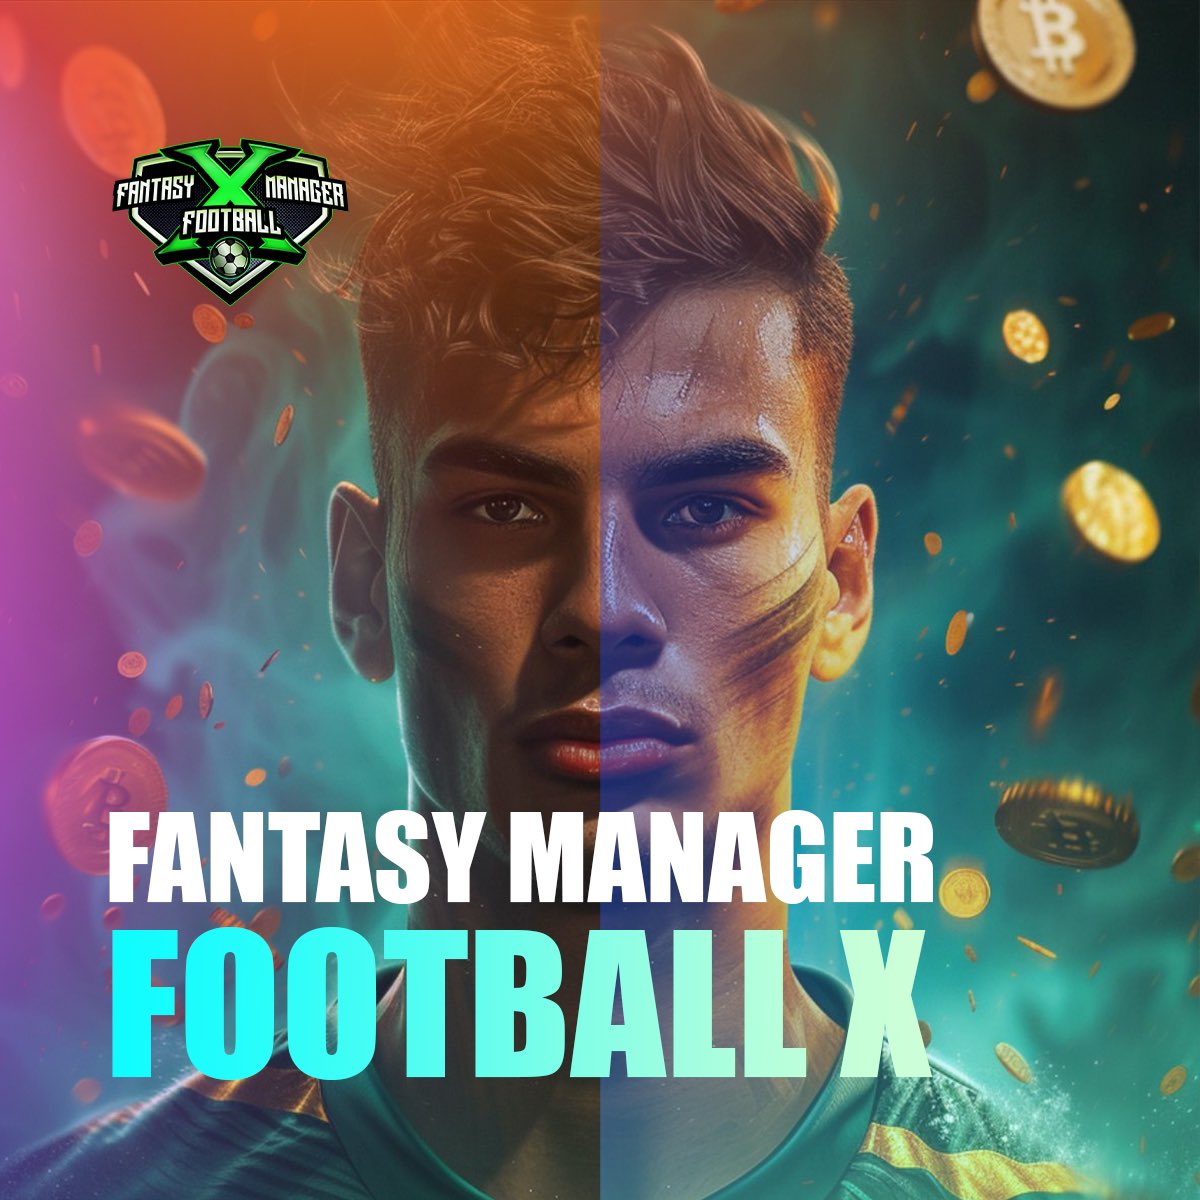 Wondering what Fantasy Manager Football X is all about? It's your ticket to the ultimate football gaming experience! Build your dream team, trade #NFTs, and compete for glory. Stay tuned for more updates!

#RealMadrid #BayernMunich #cryptocurrency #CRYMUN #P2E